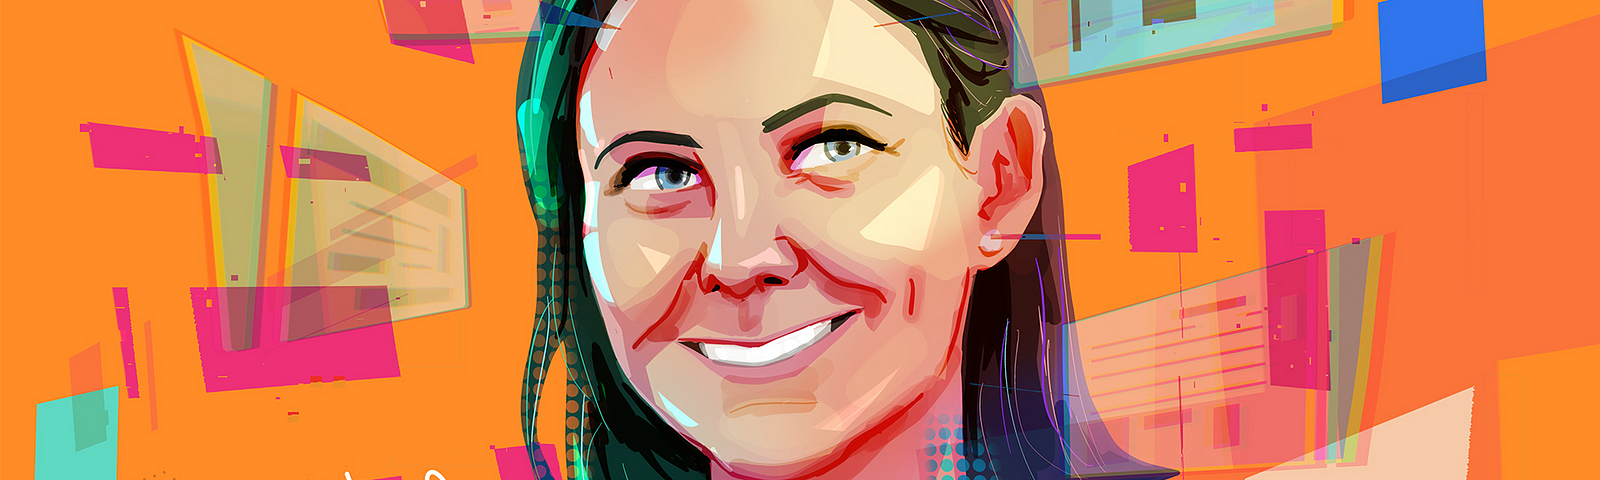 A digital portrait of a smiling Kelly beams with light. Skewed text reads “Senior UX Engineer.” Multi-colored squares float around her. She’s in front of a bright orange background.